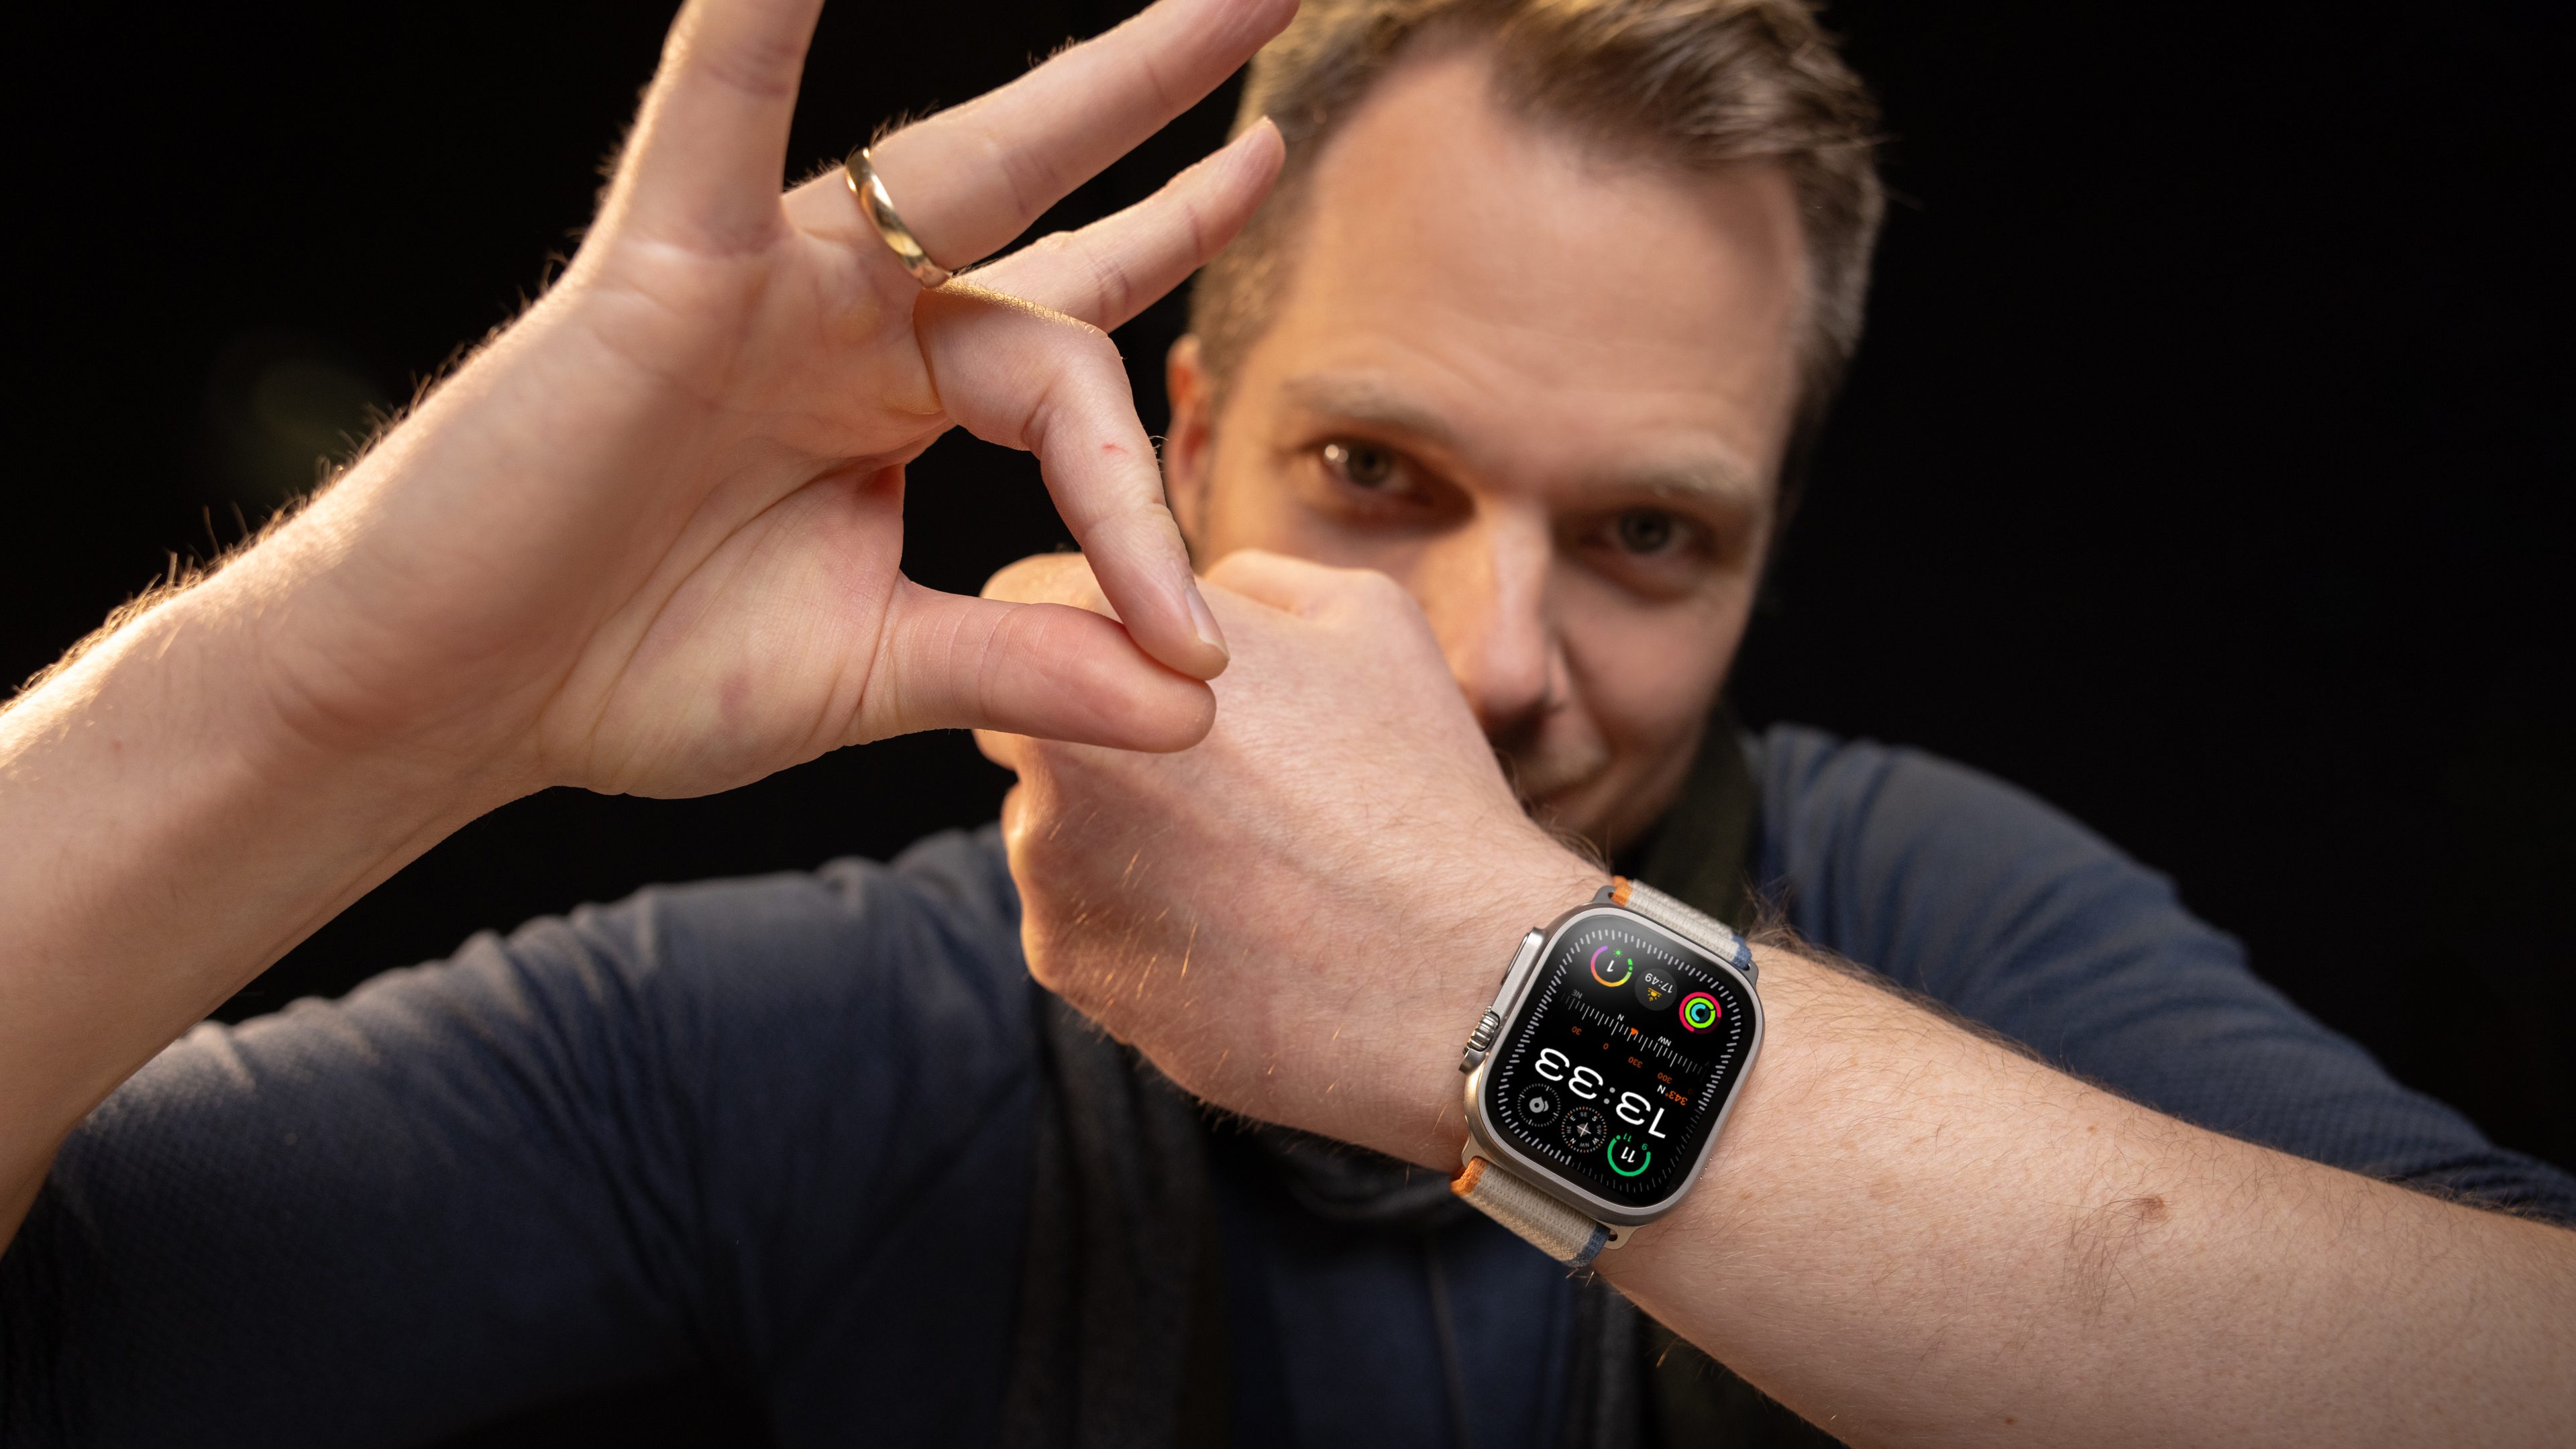 Apple Watch Ultra Review - Reviewed